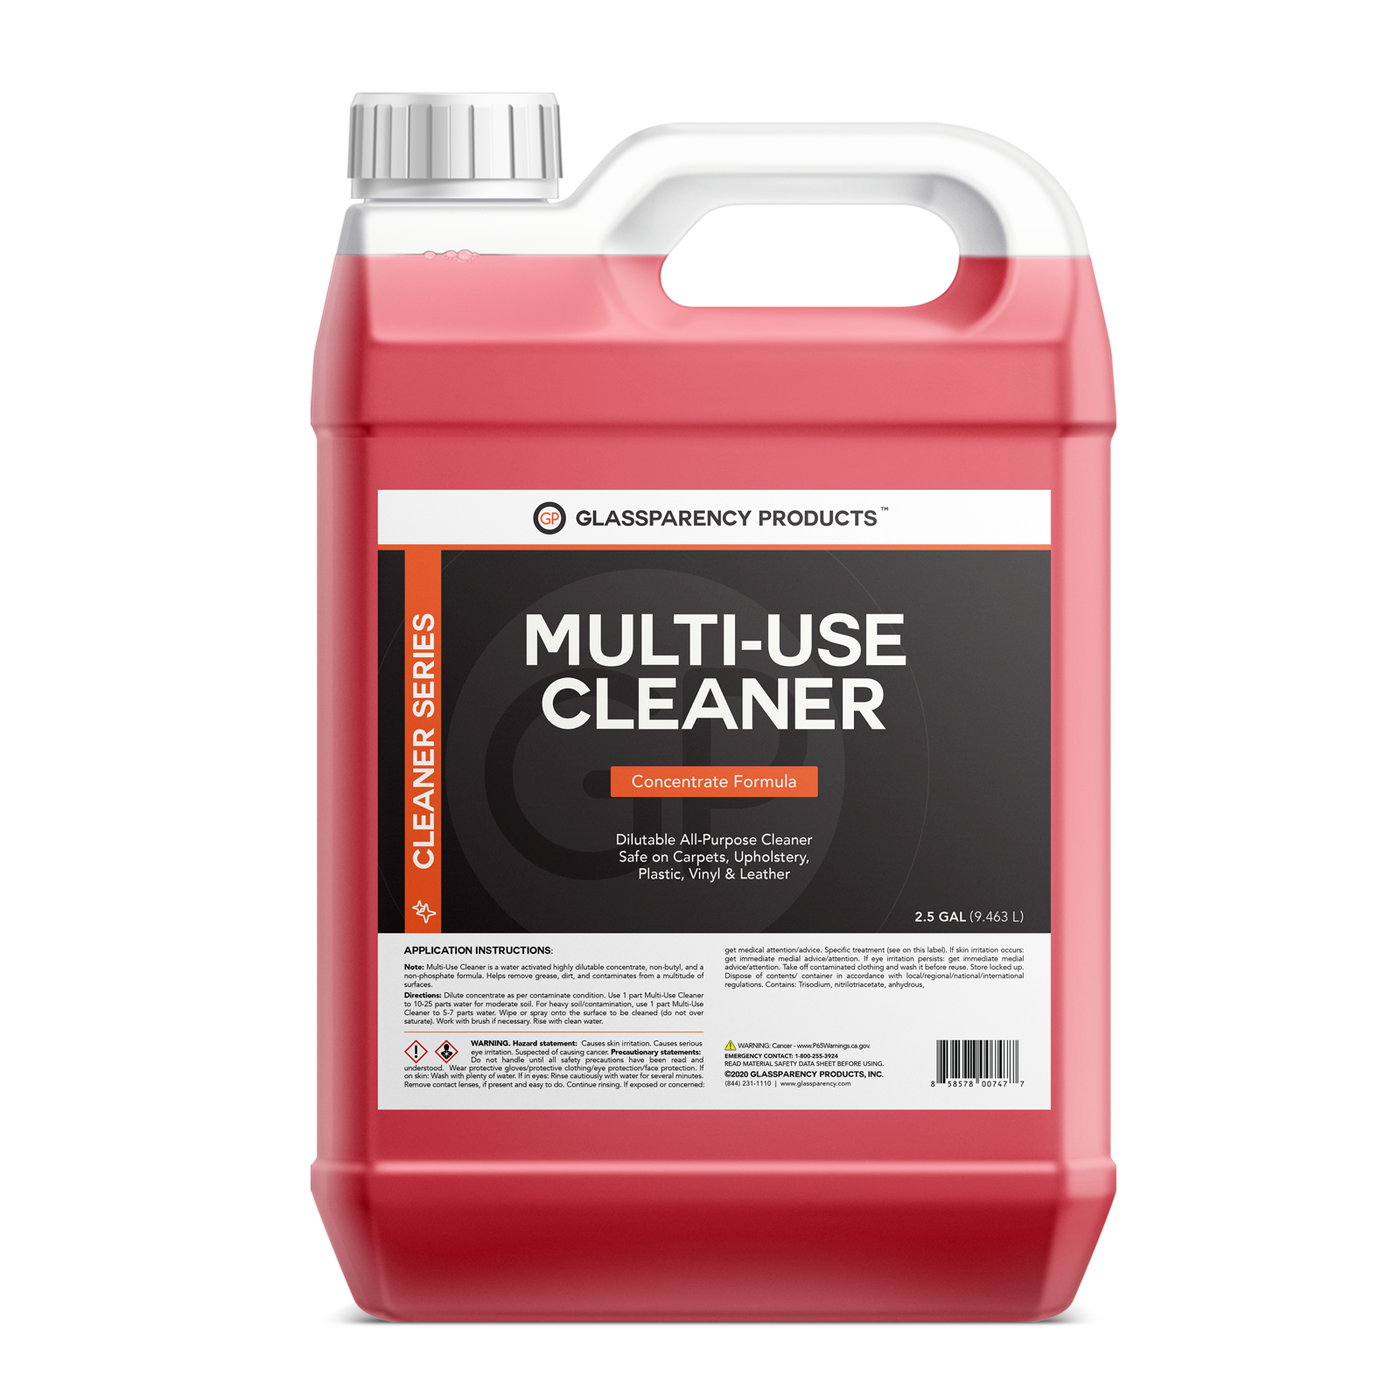 Read This Before Shopping for Multi Surface Cleaners